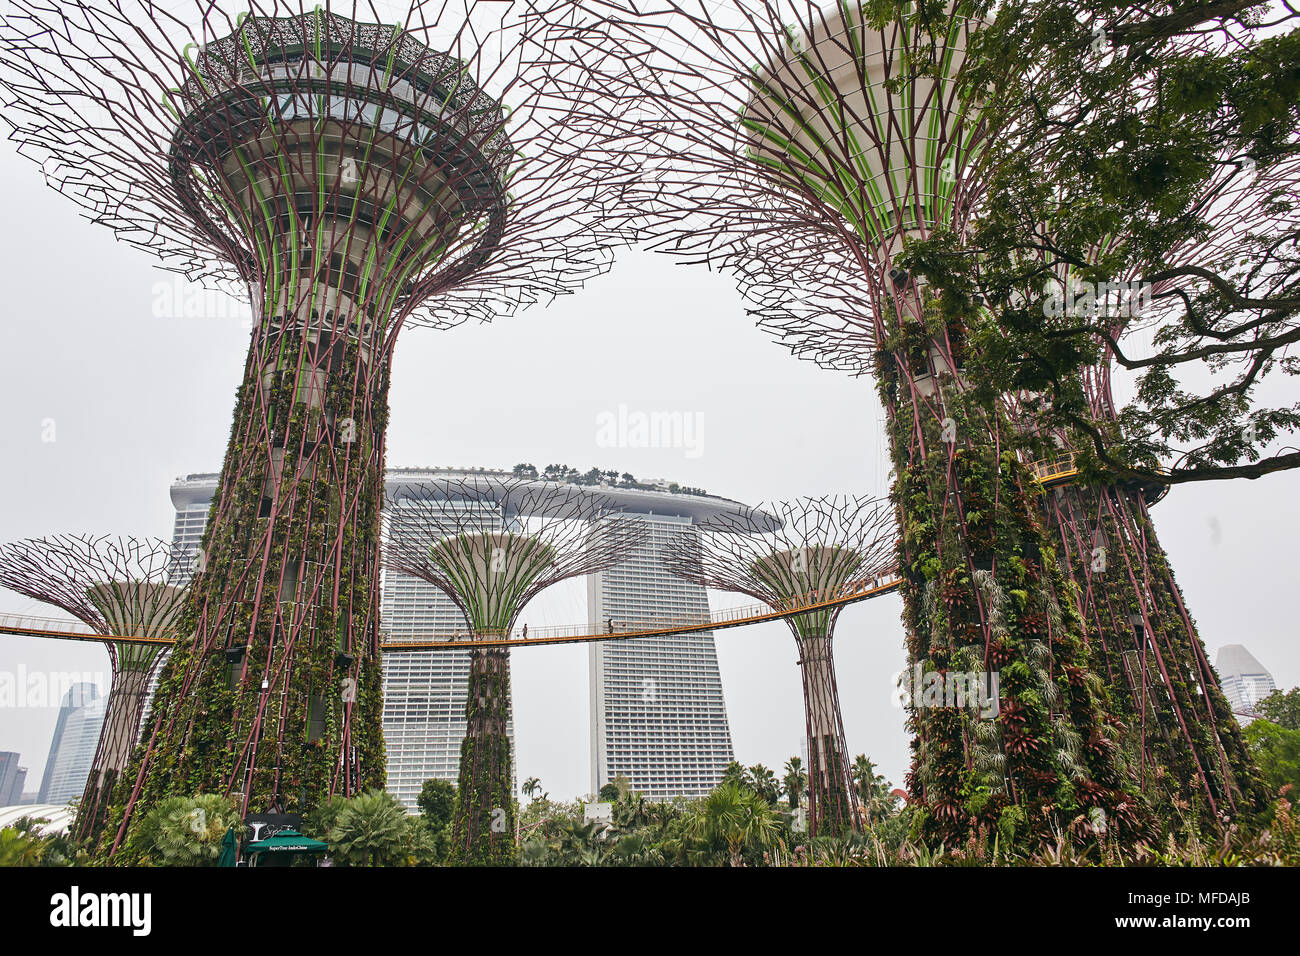 The close-up view from low angle of the Super Trees in Gardens by the Bay with some people enjoying in the park, The Marina Bay Sands in background Stock Photo